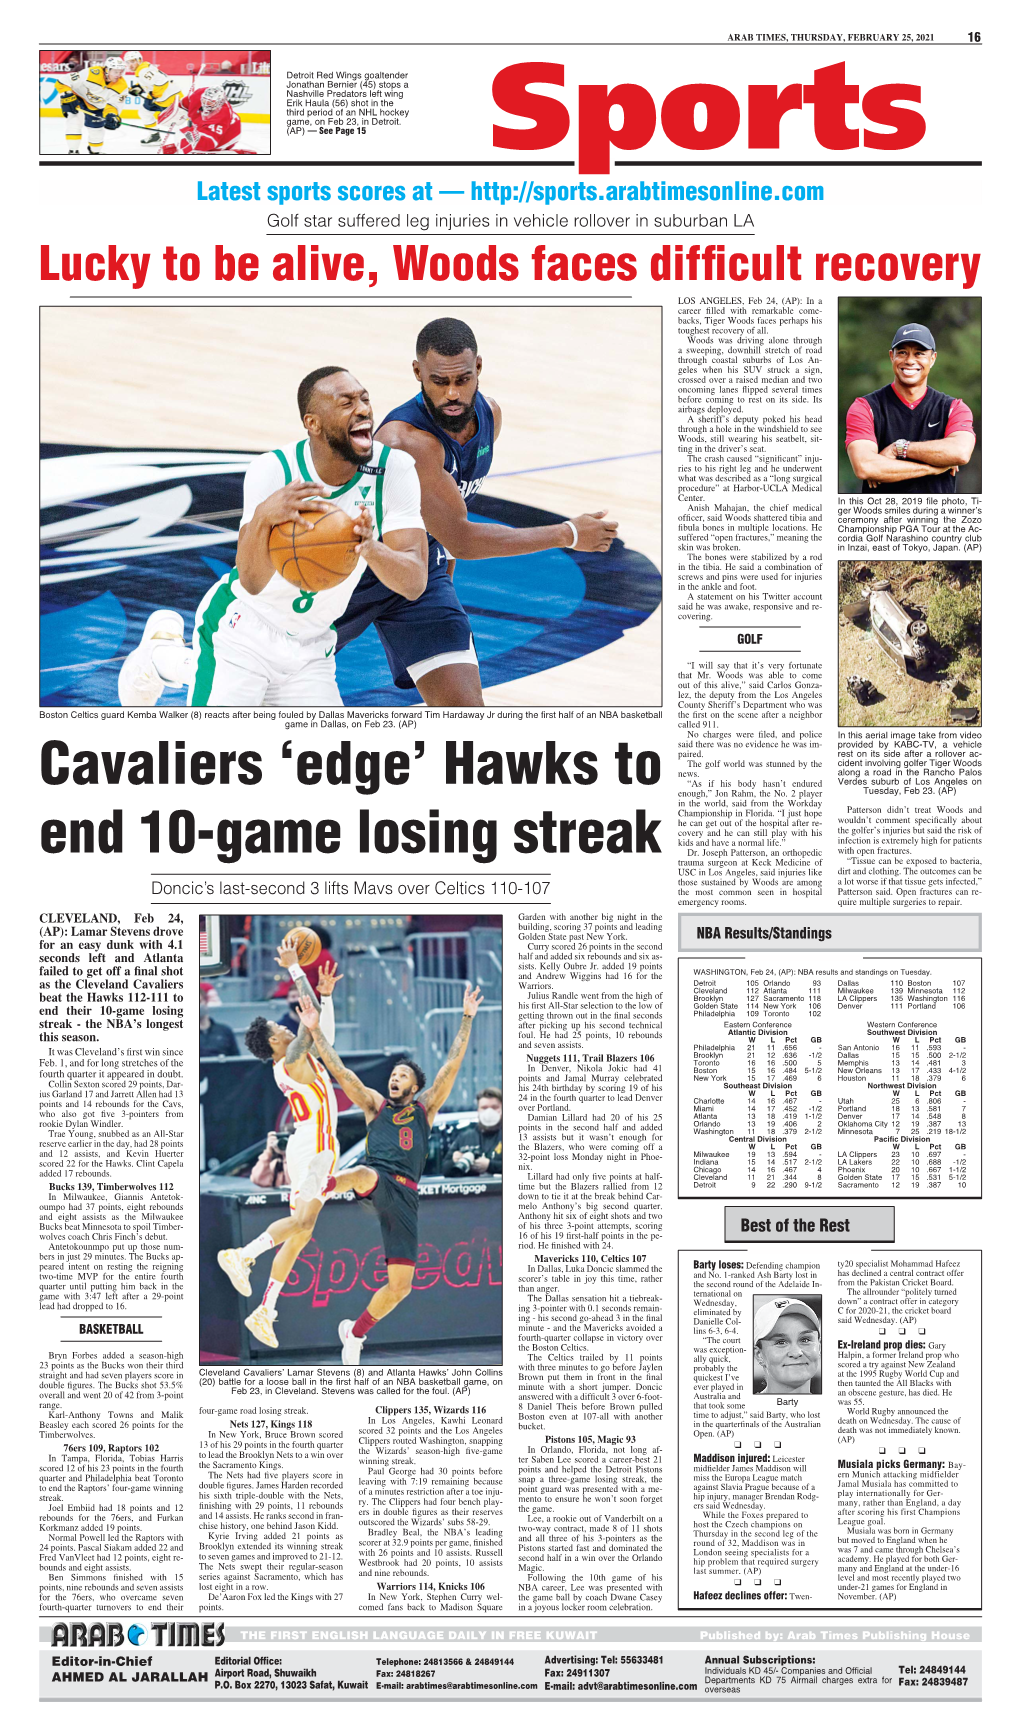 Cavaliers ‘Edge’ Hawks to “As If His Body Hasn’T Endured Verdes Suburb of Los Angeles on Enough,” Jon Rahm, the No